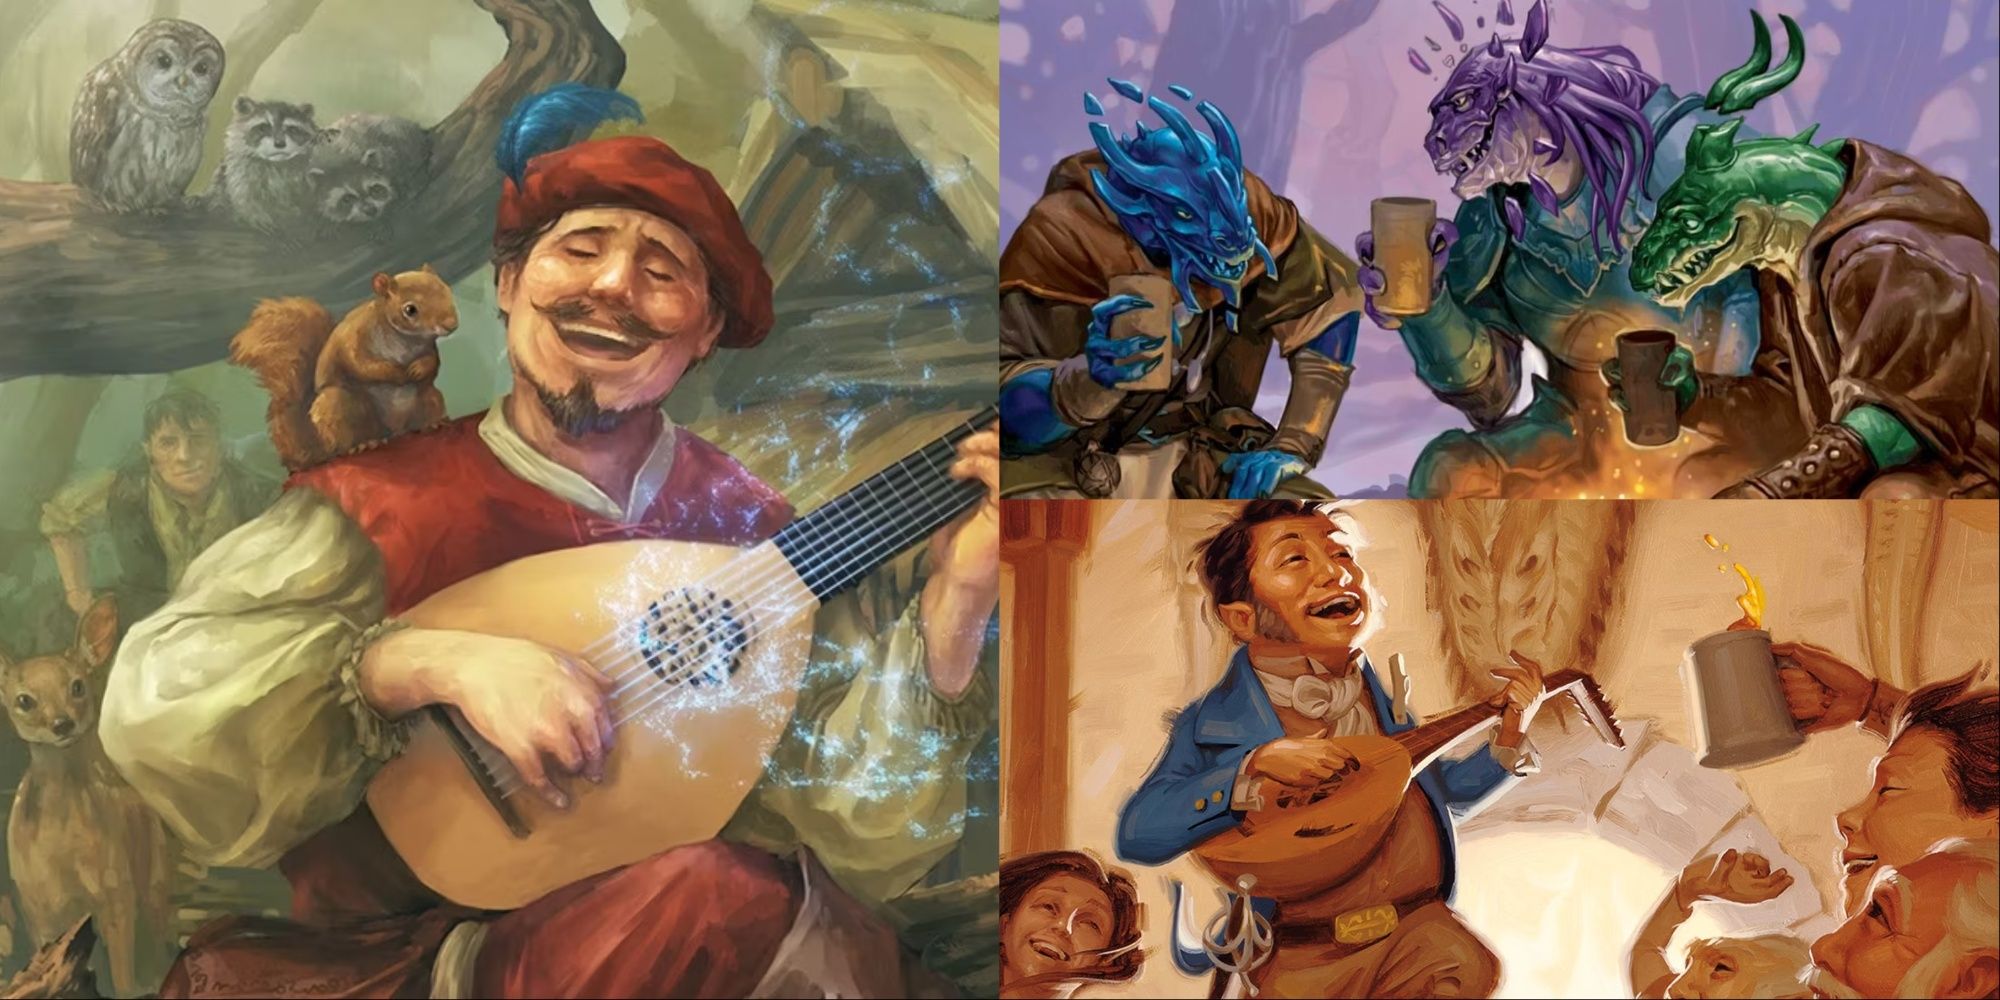 Dungeons and Dragons Bard Playing A Lute In A Forest To Animals - Gnome Bard Playing A Lute In A Tavern To Humanoids -Three Gem Dragons Sharing Drinks Over A Fire via Wizards of the Coast